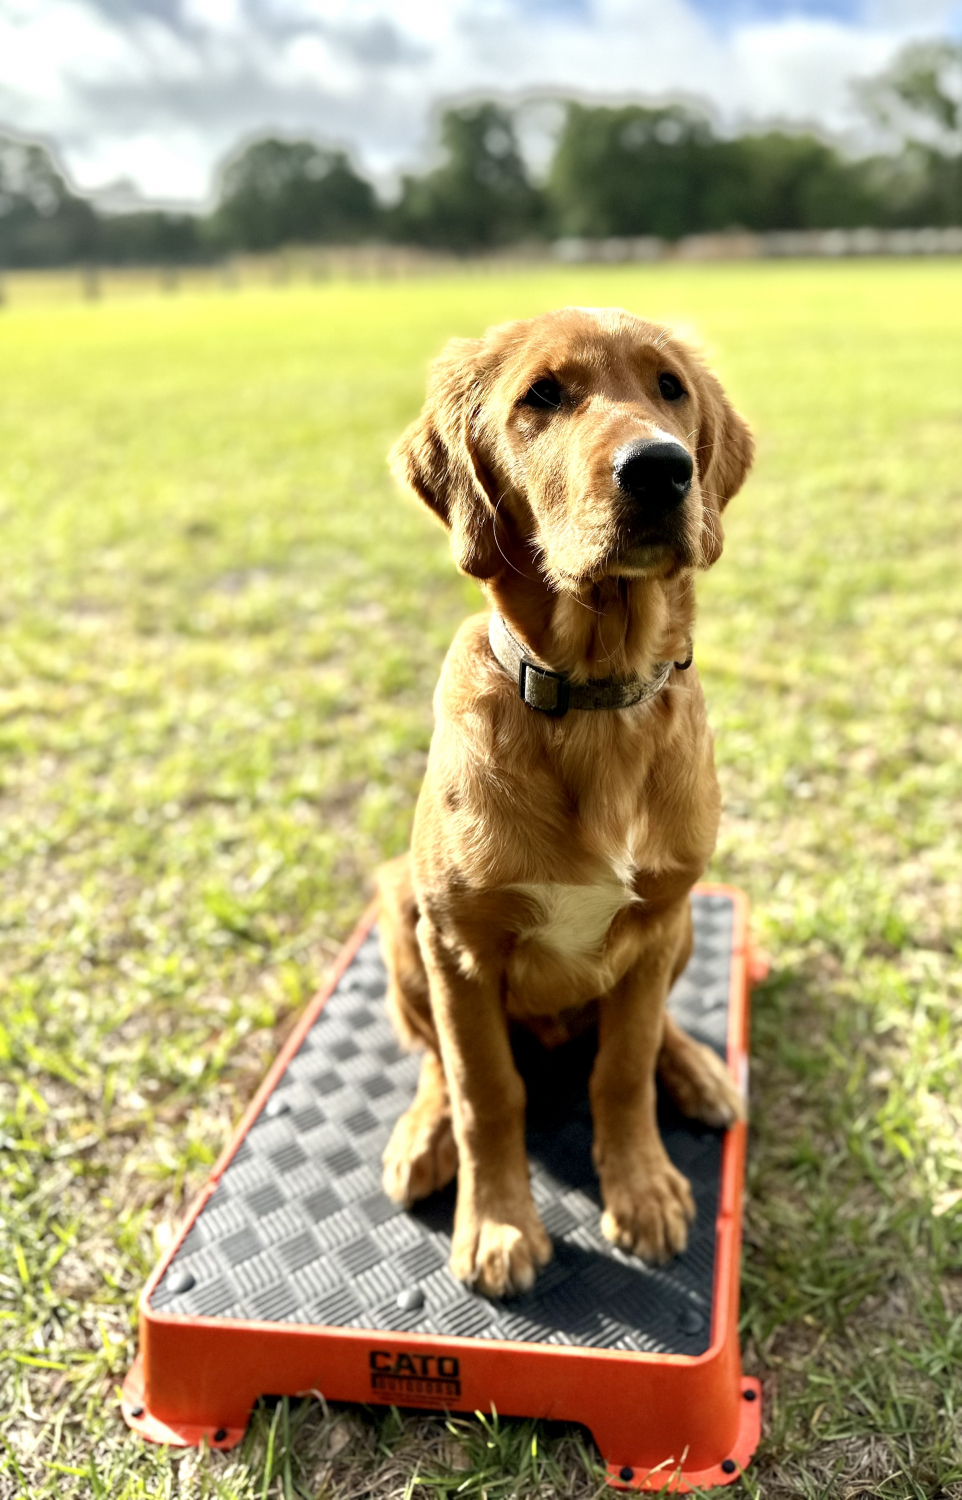 Teaching your dog to LOVE the Cato Board - intro to platform